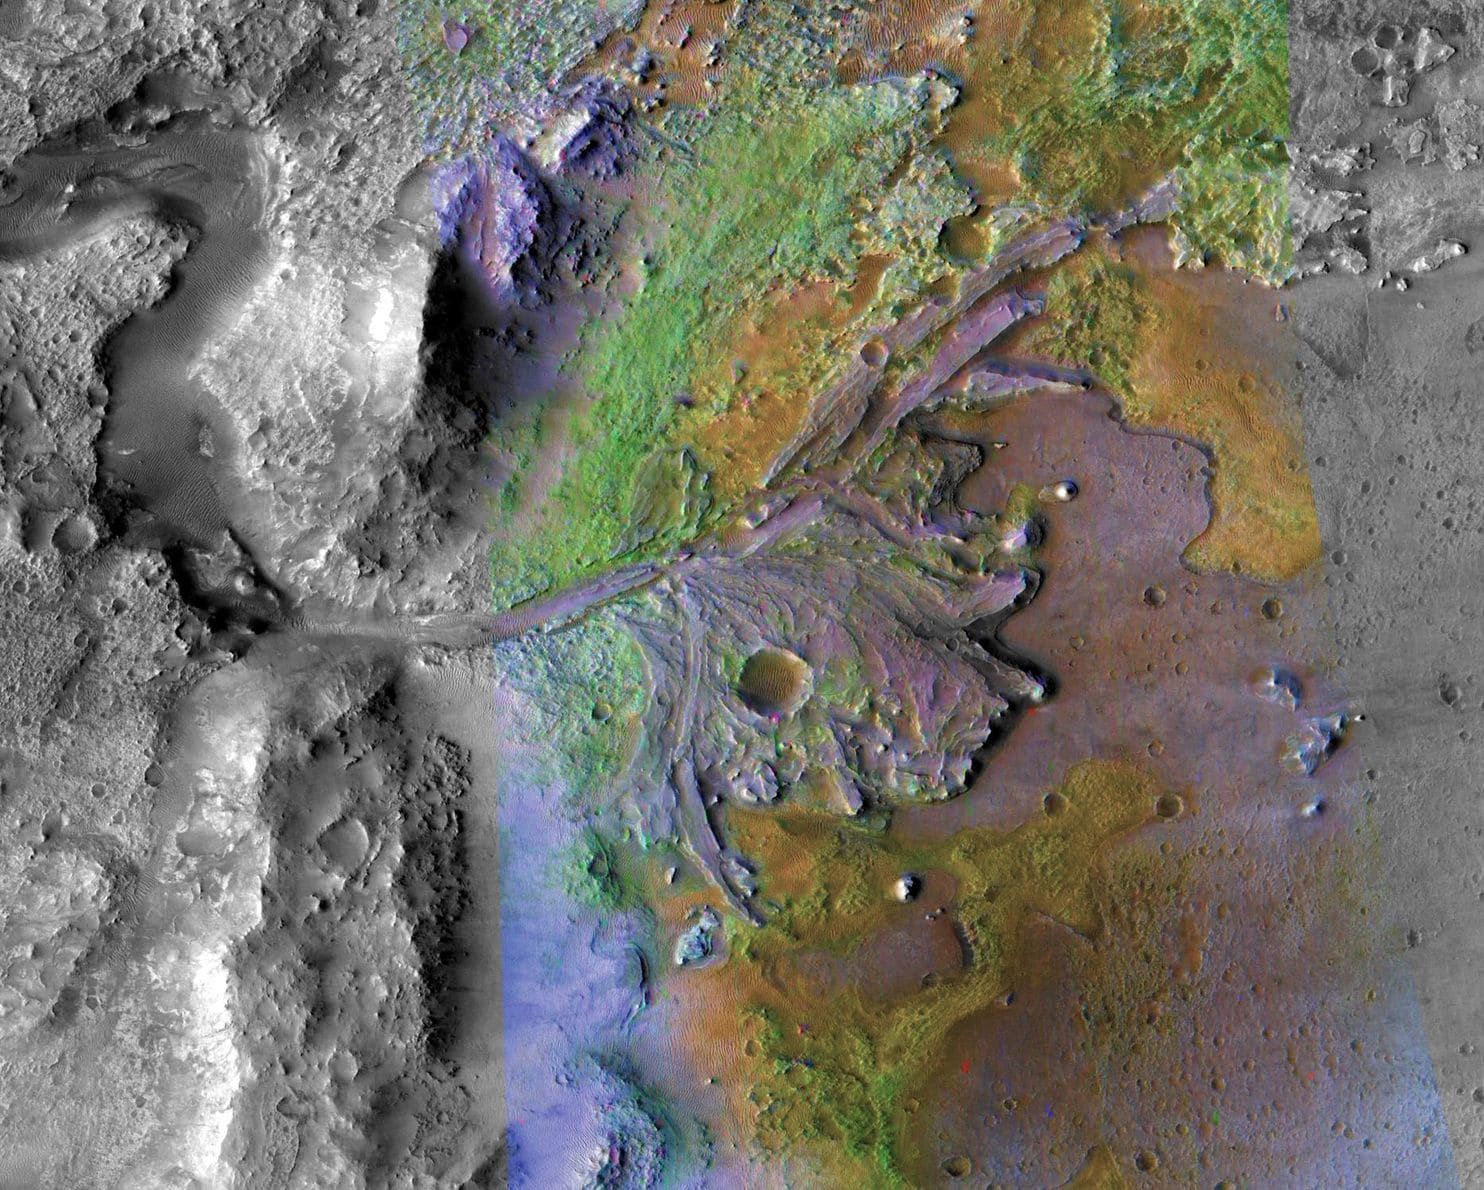 Details of the ancient water channels in Jezero Crater. (NASA/JPL-Caltech/MSSS/JHU-APL)